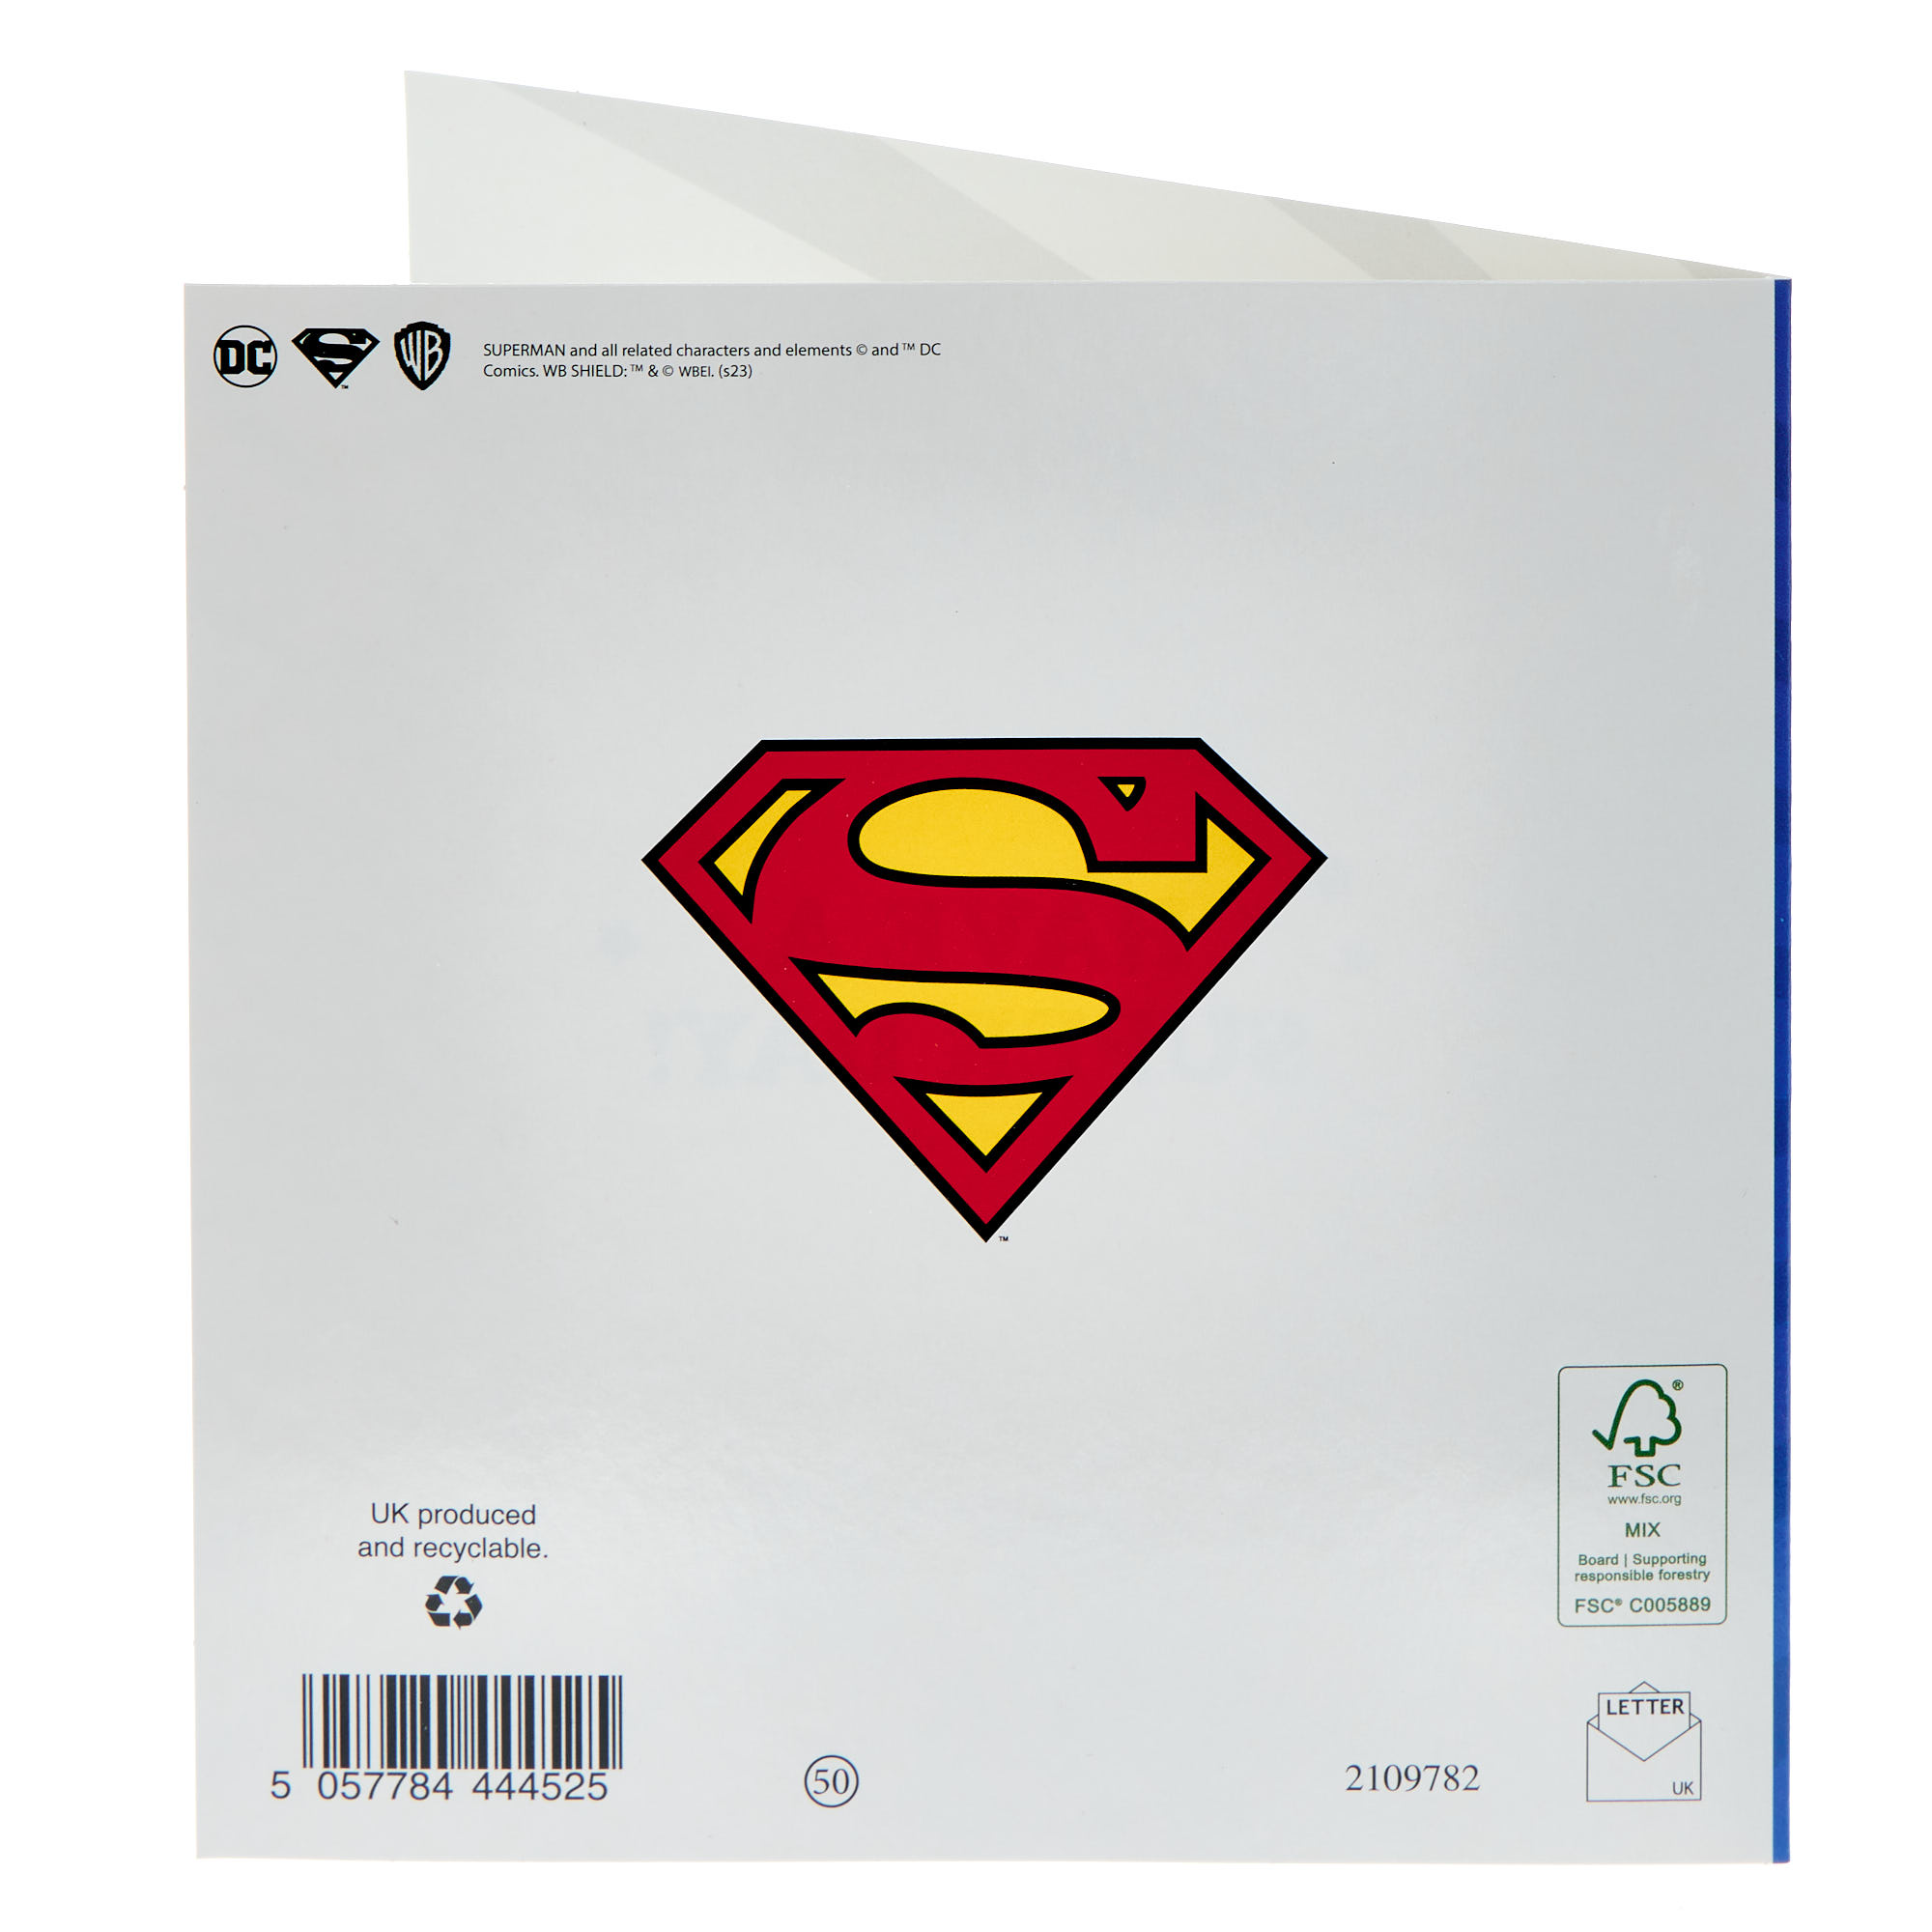 Superman Logo Happy Father's Day Card